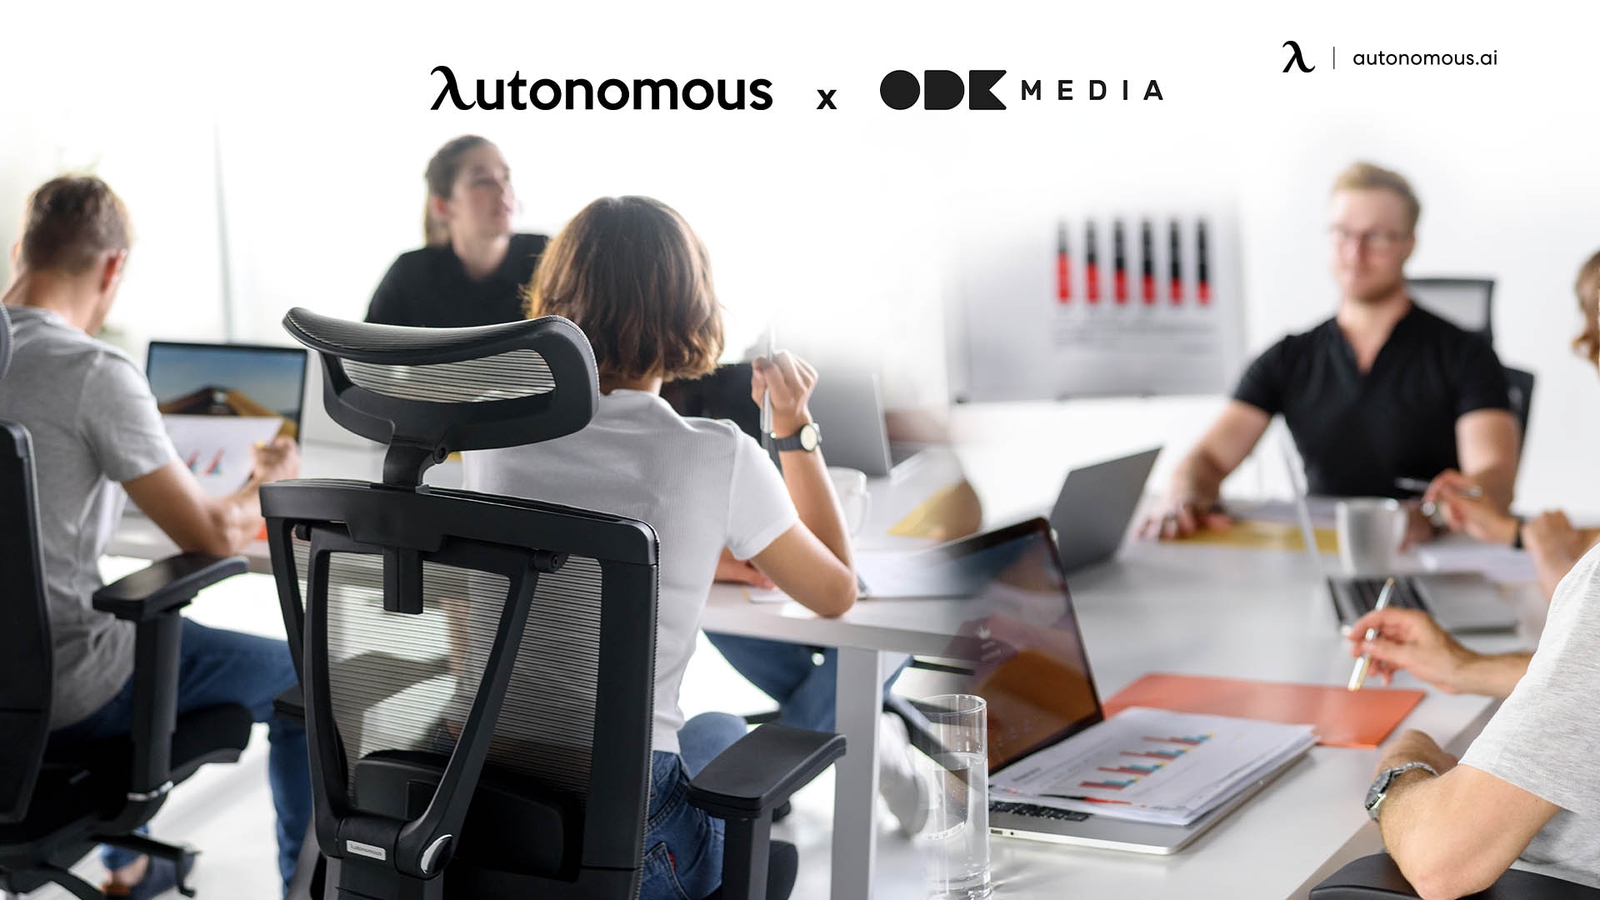 ODK Media Employee Discount Offer from Autonomous